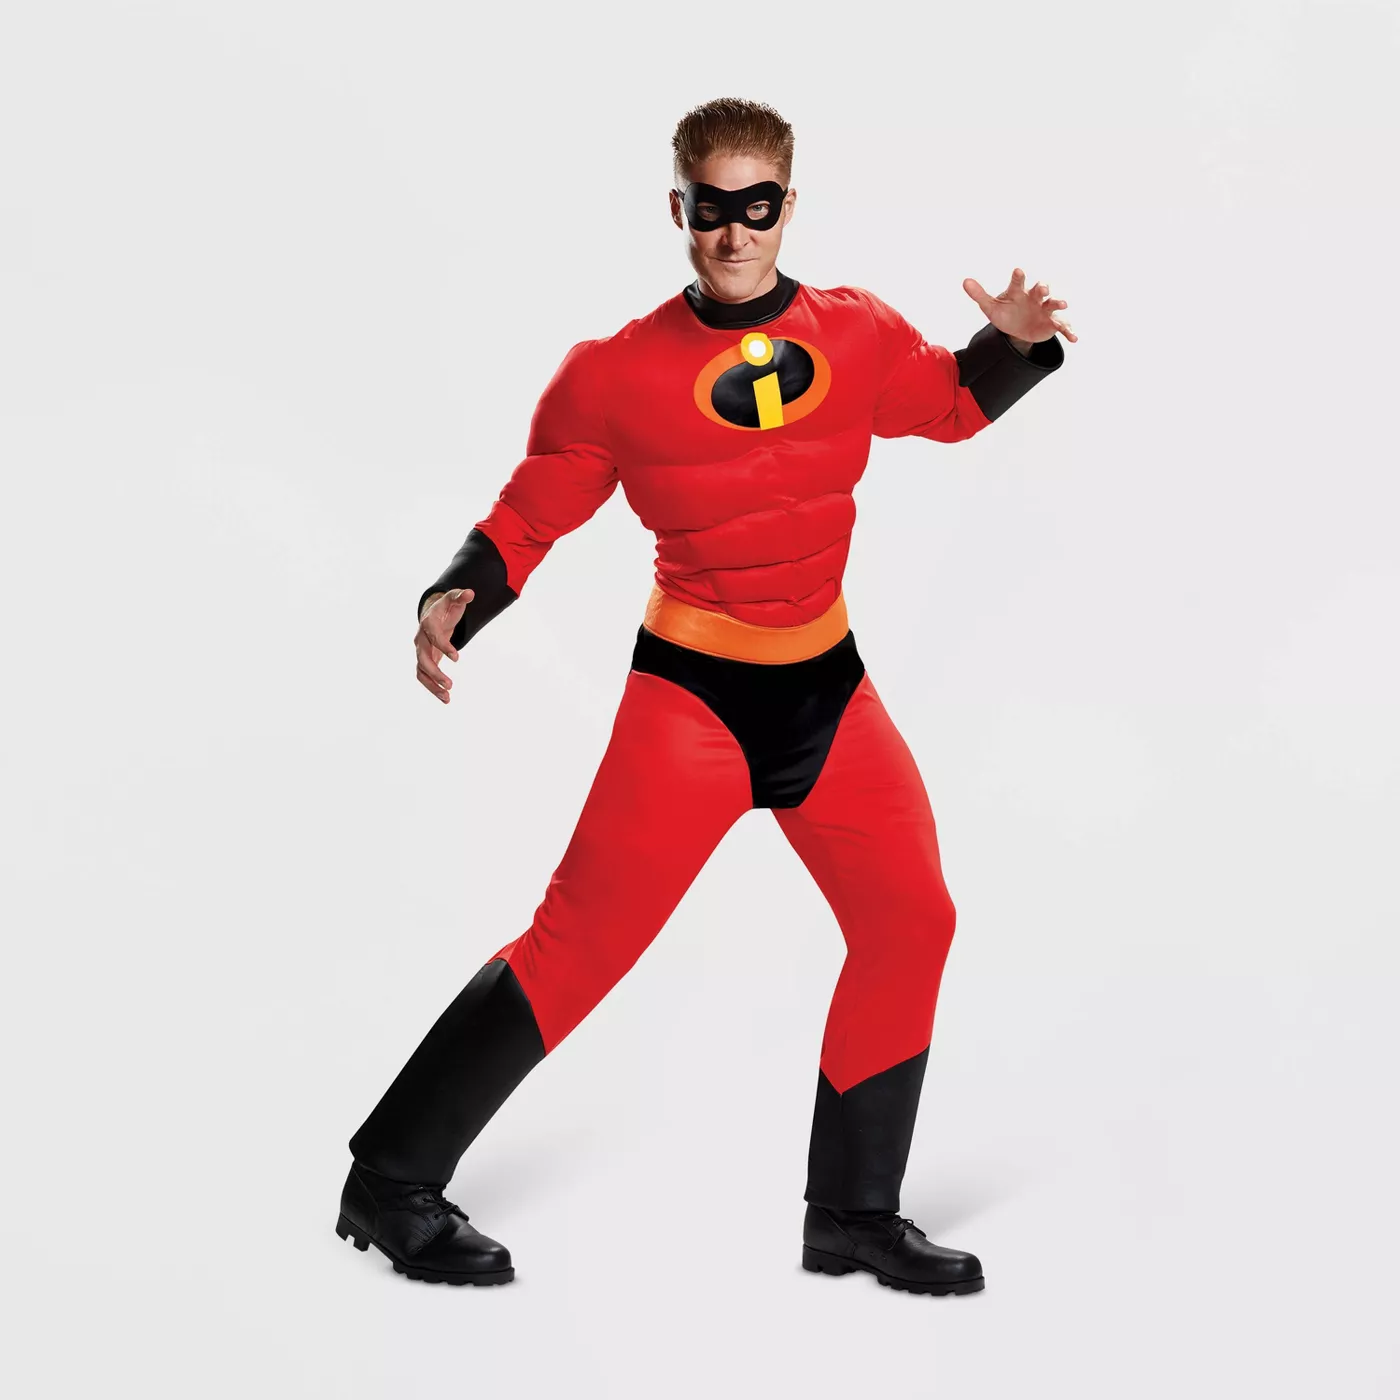 Men's The Incredibles Mr. Incredible Classic Muscle Halloween Costume - image 1 of 1